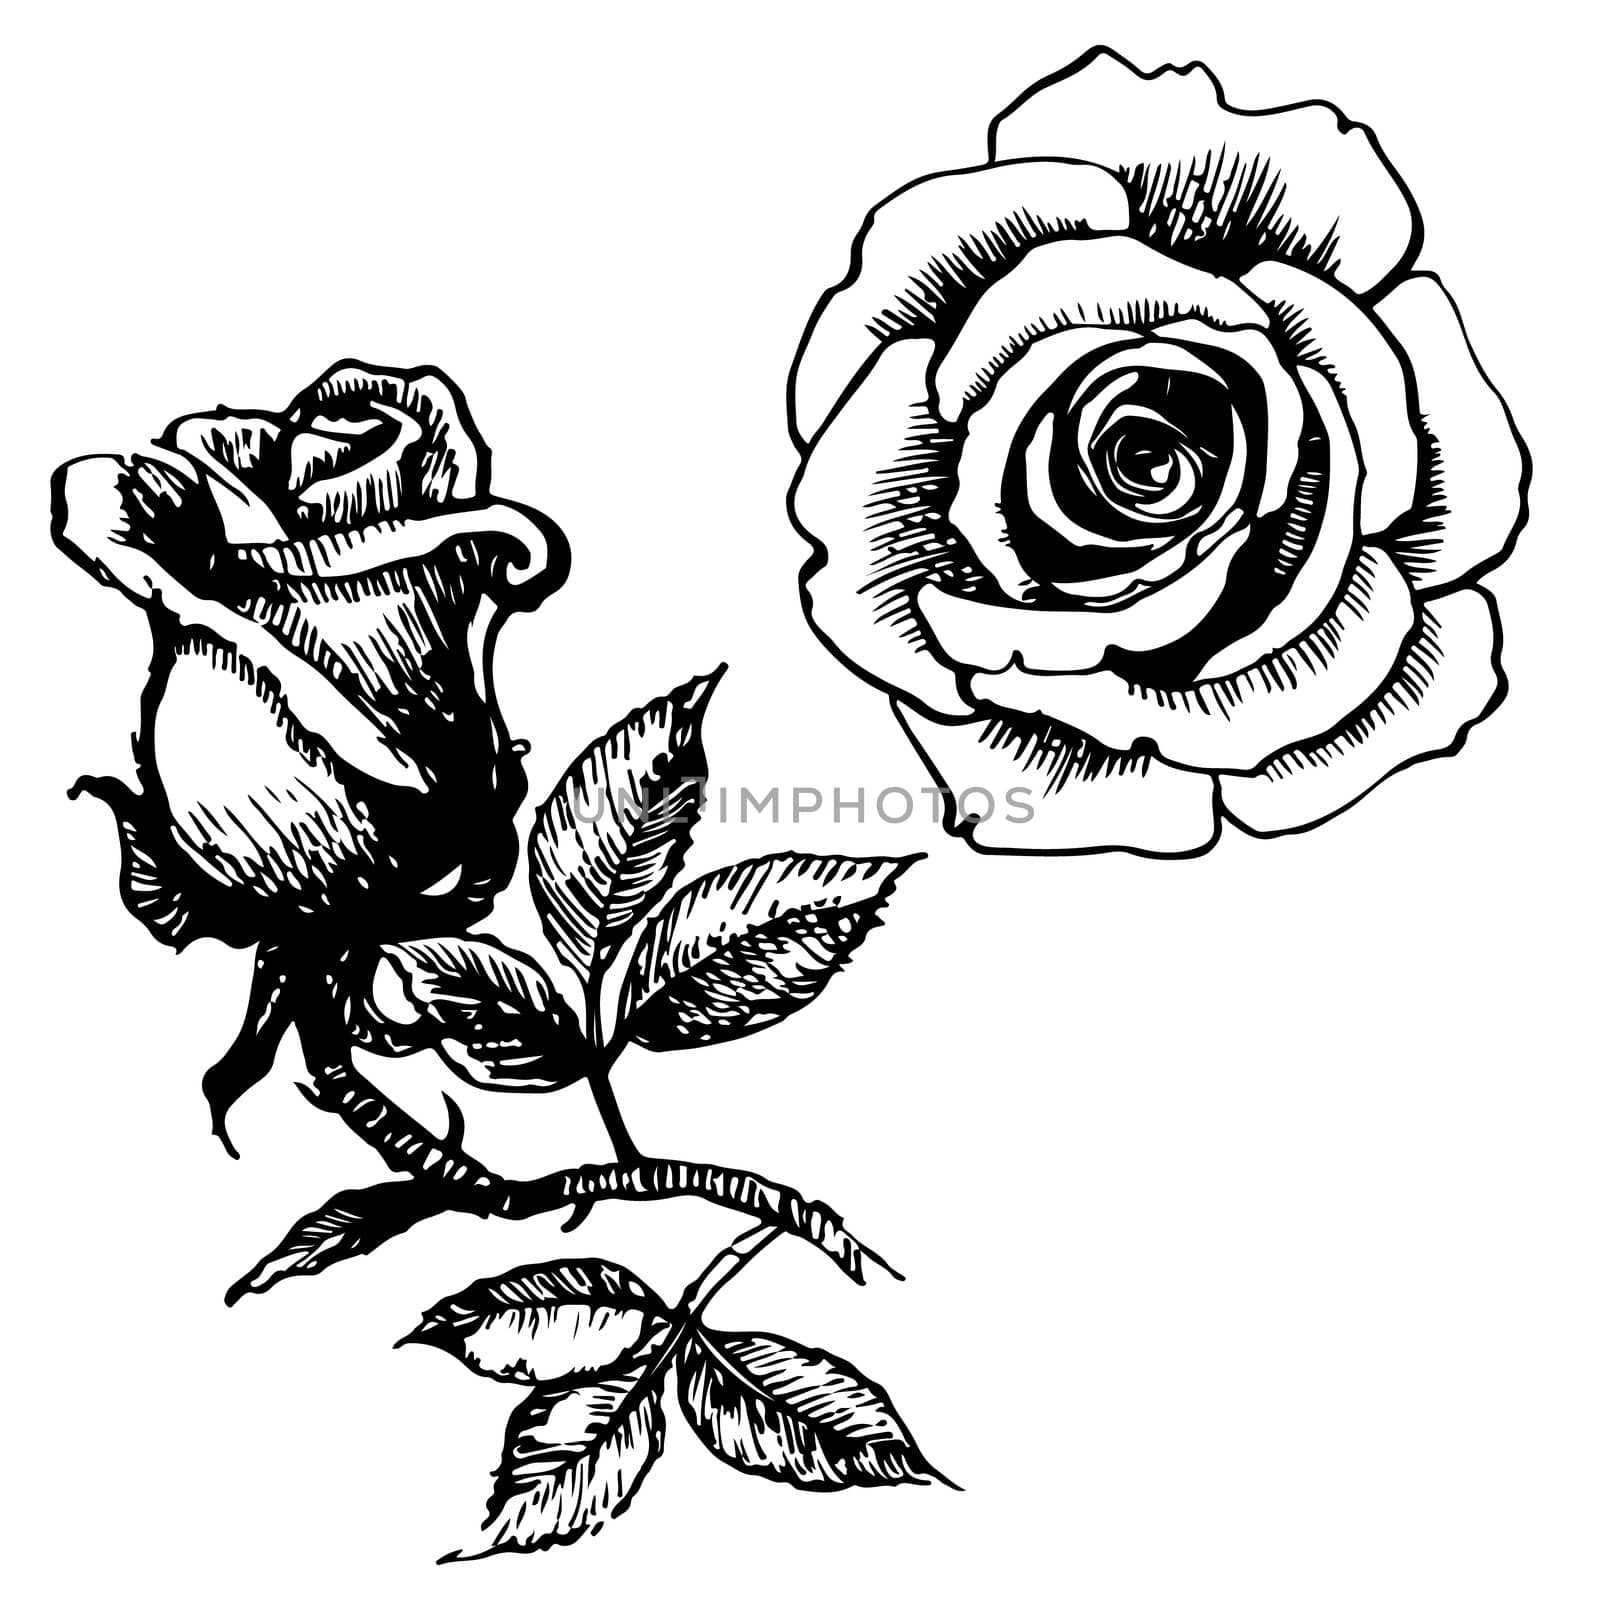 Rose and leaves hand drawn isolated on white background